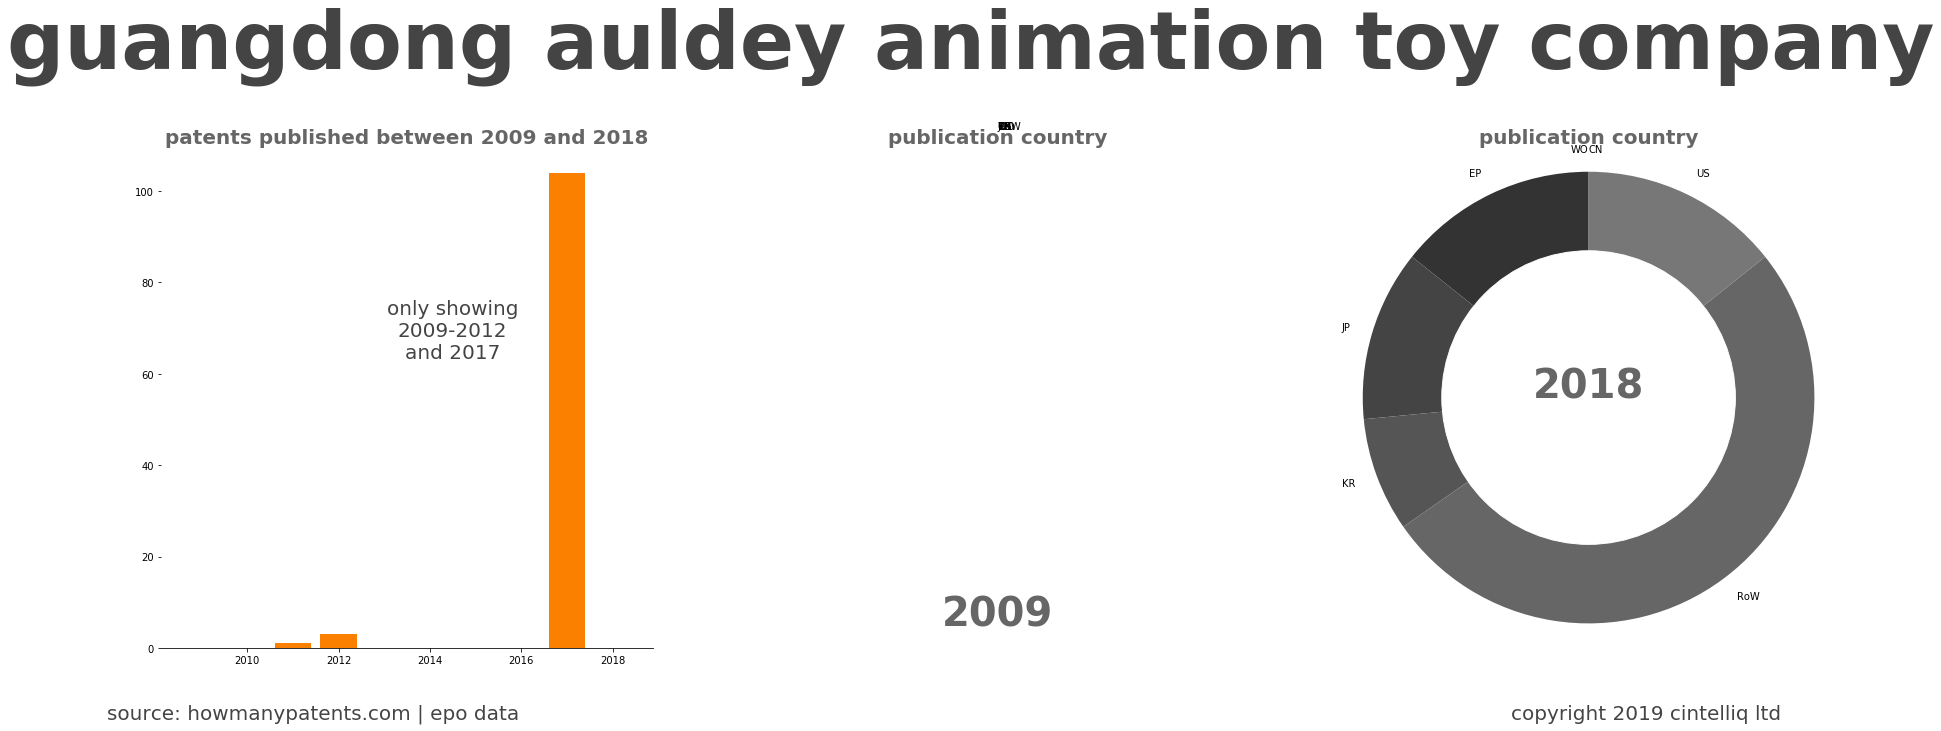 summary of patents for Guangdong Auldey Animation Toy Company